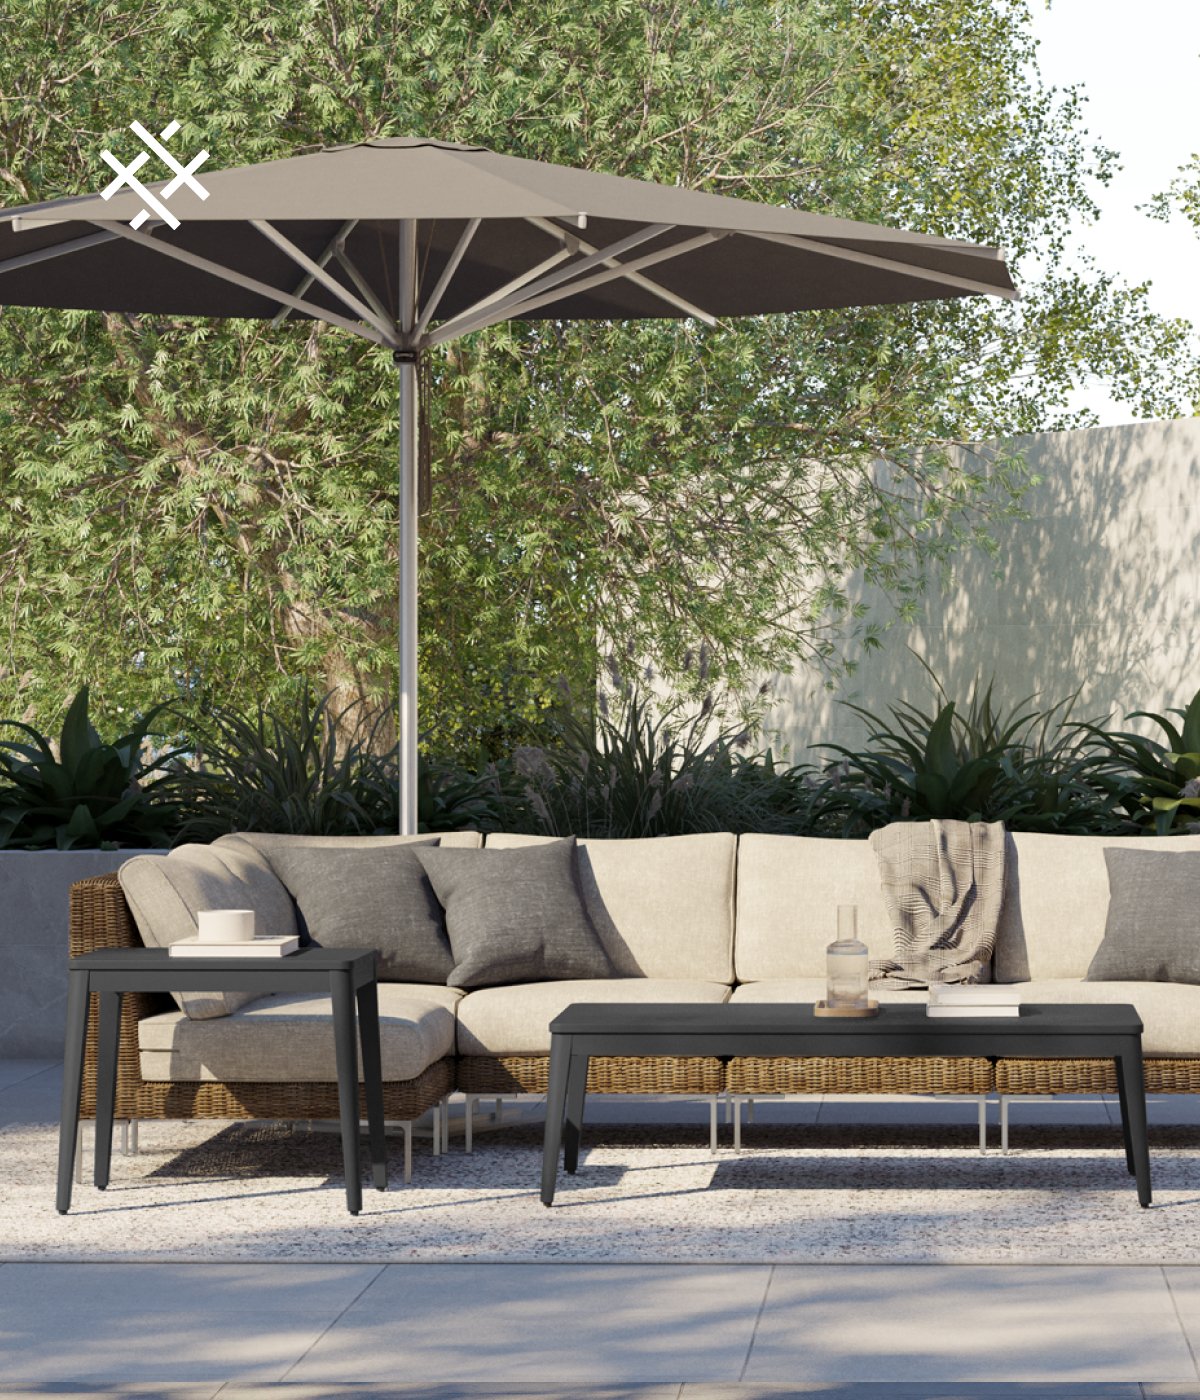 Discover the Perfect Pairing Enhance your Outer set with our versatile range of expansions and outdoor accessories, from sophisticated dining tables to lounge-worthy chaises. All are thoughtfully designed to make spending time outside relaxing and effortless. Shop Now